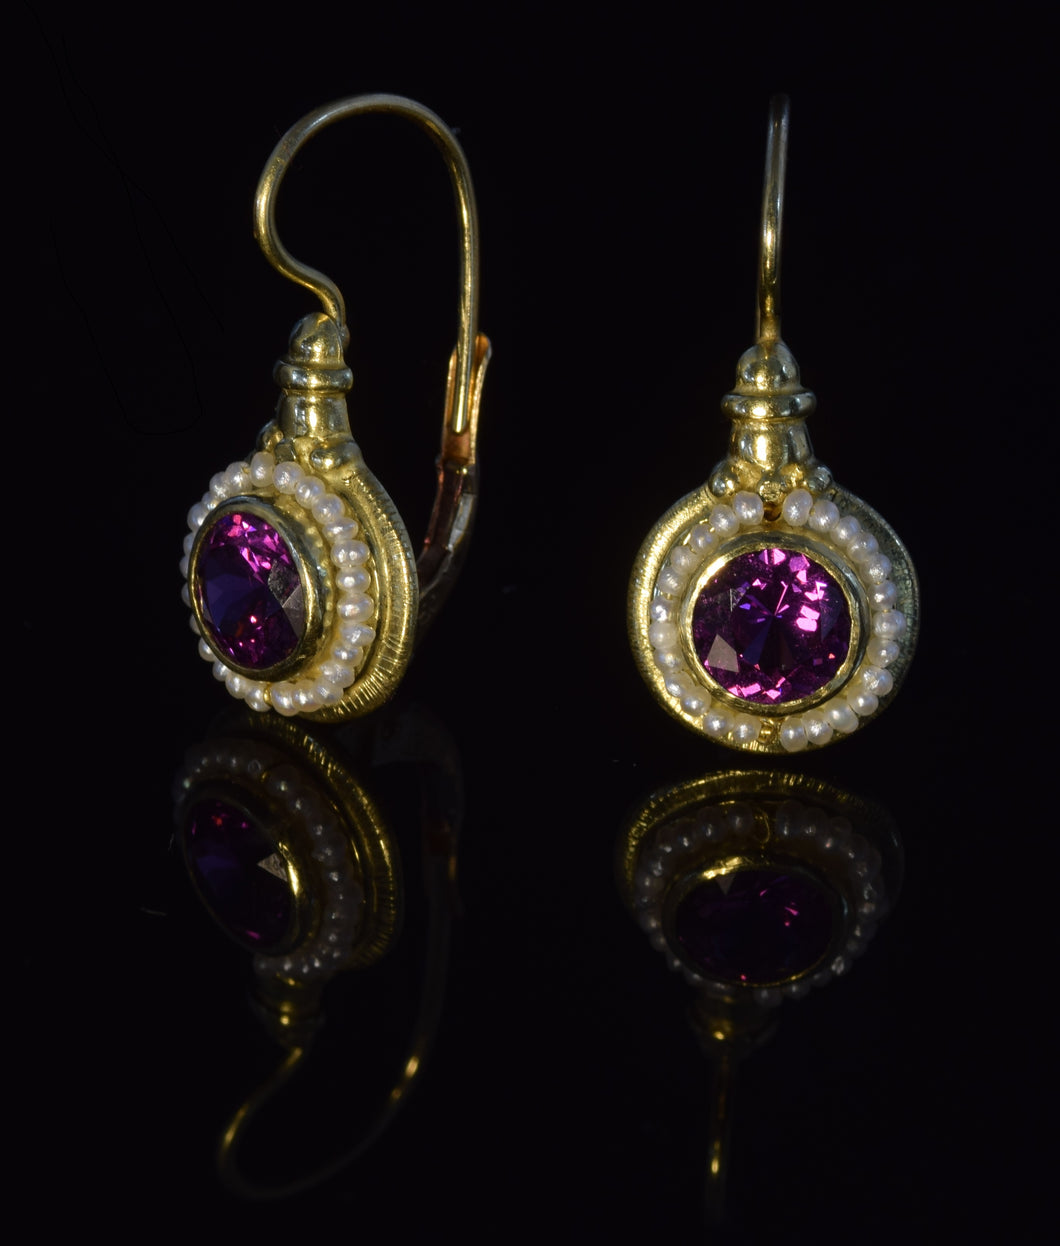 18K yellow gold 6 1/2 mm faceted rhodolite garnet French hook earrings with seed pearls